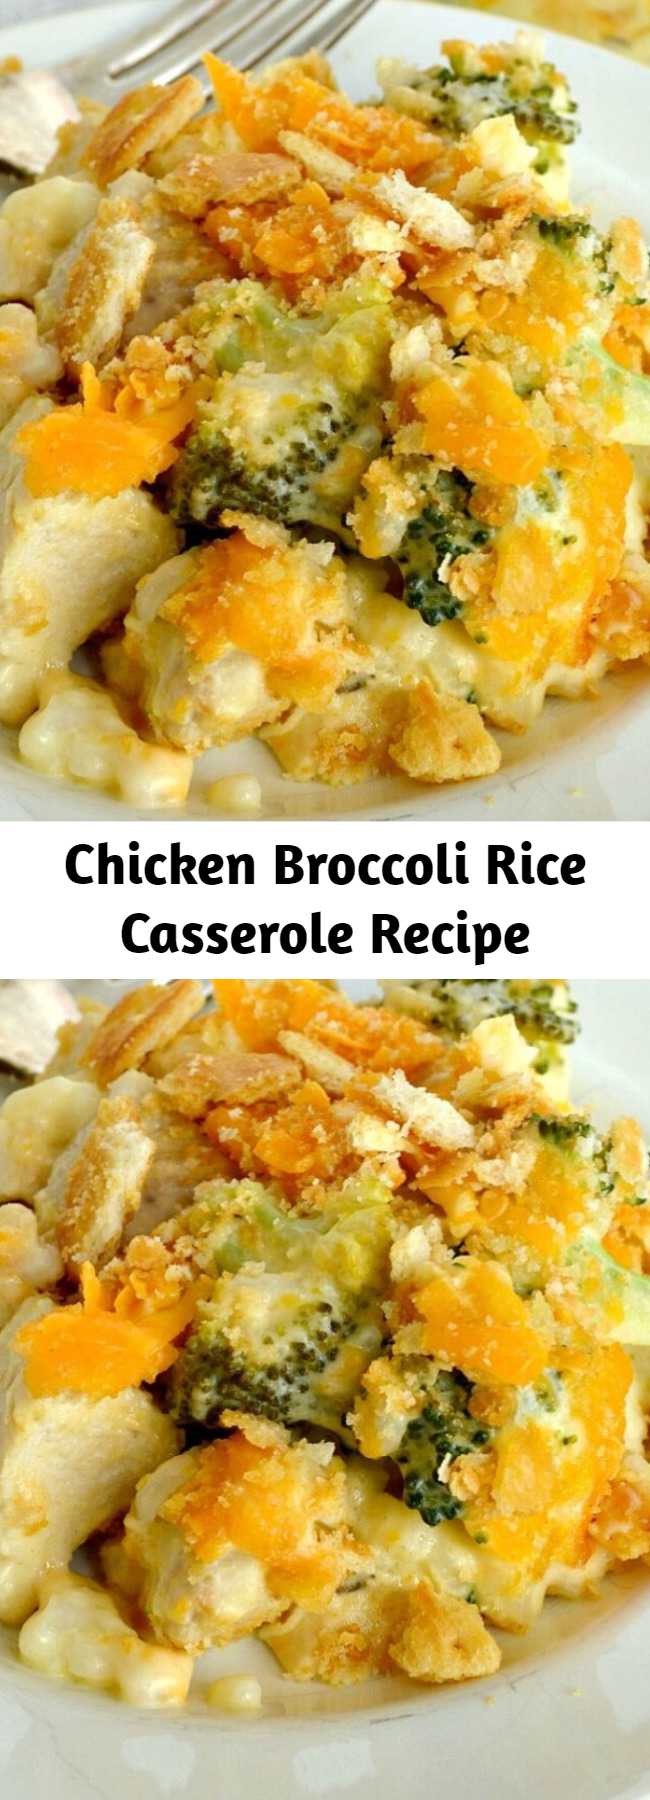 Chicken Broccoli Rice Casserole Recipe - This amazing casserole is loaded with chunks of chicken breasts, fresh broccoli and rice in the creamiest, most flavorful sauce. Every bite is fabulous comfort food!